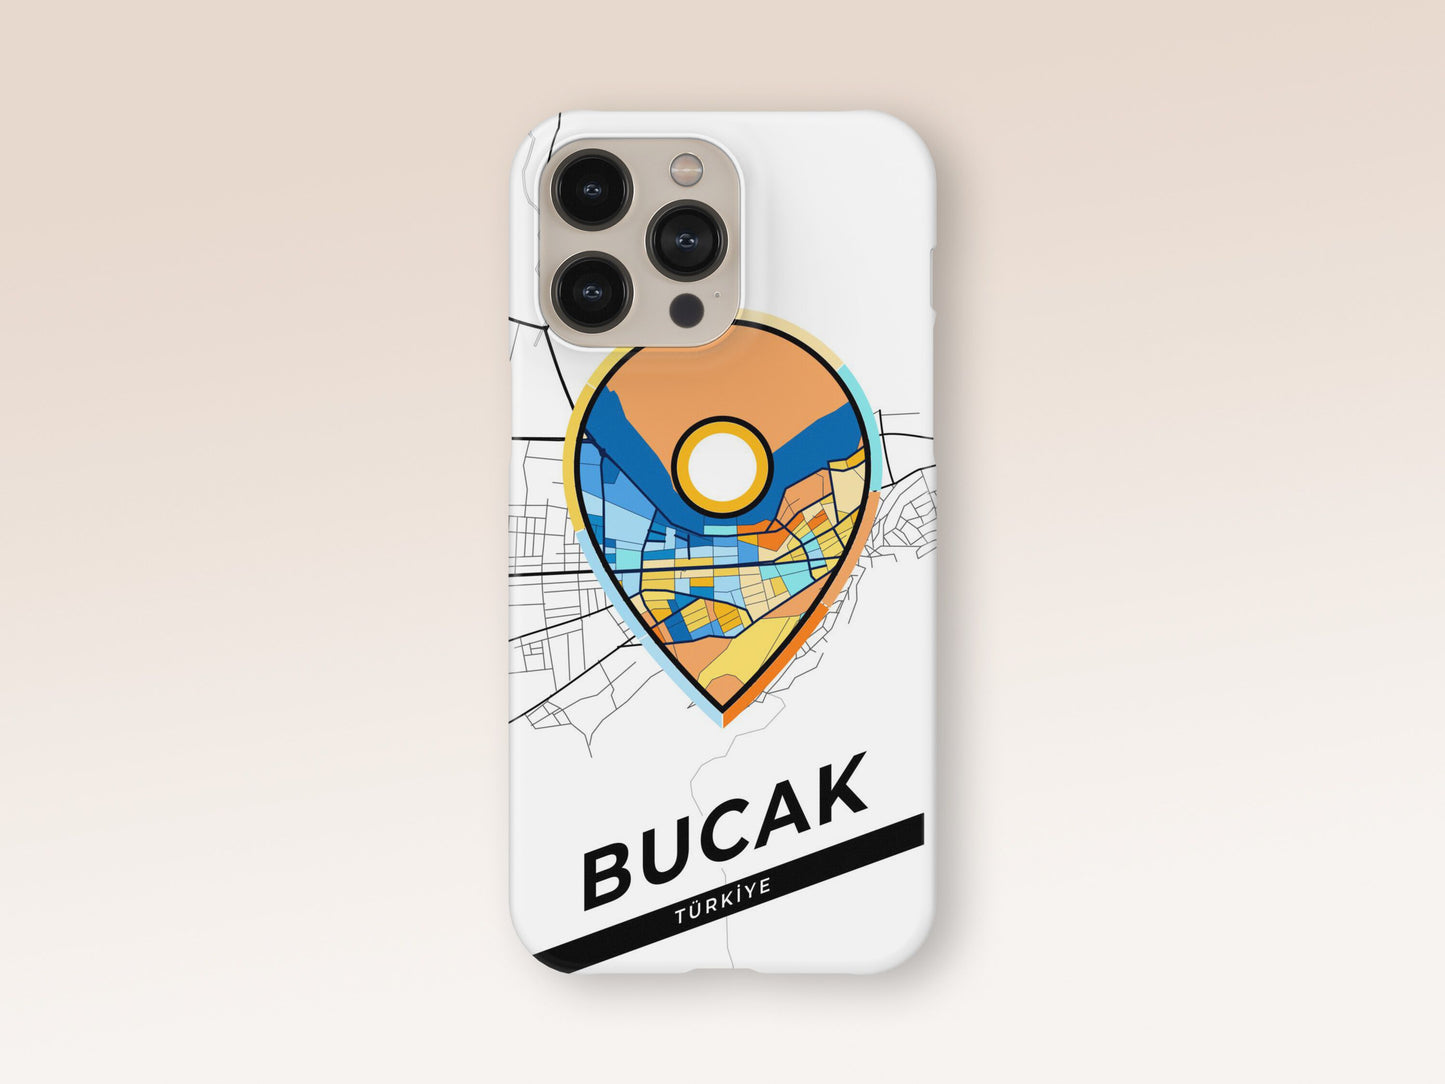 Bucak Turkey slim phone case with colorful icon. Birthday, wedding or housewarming gift. Couple match cases. 1